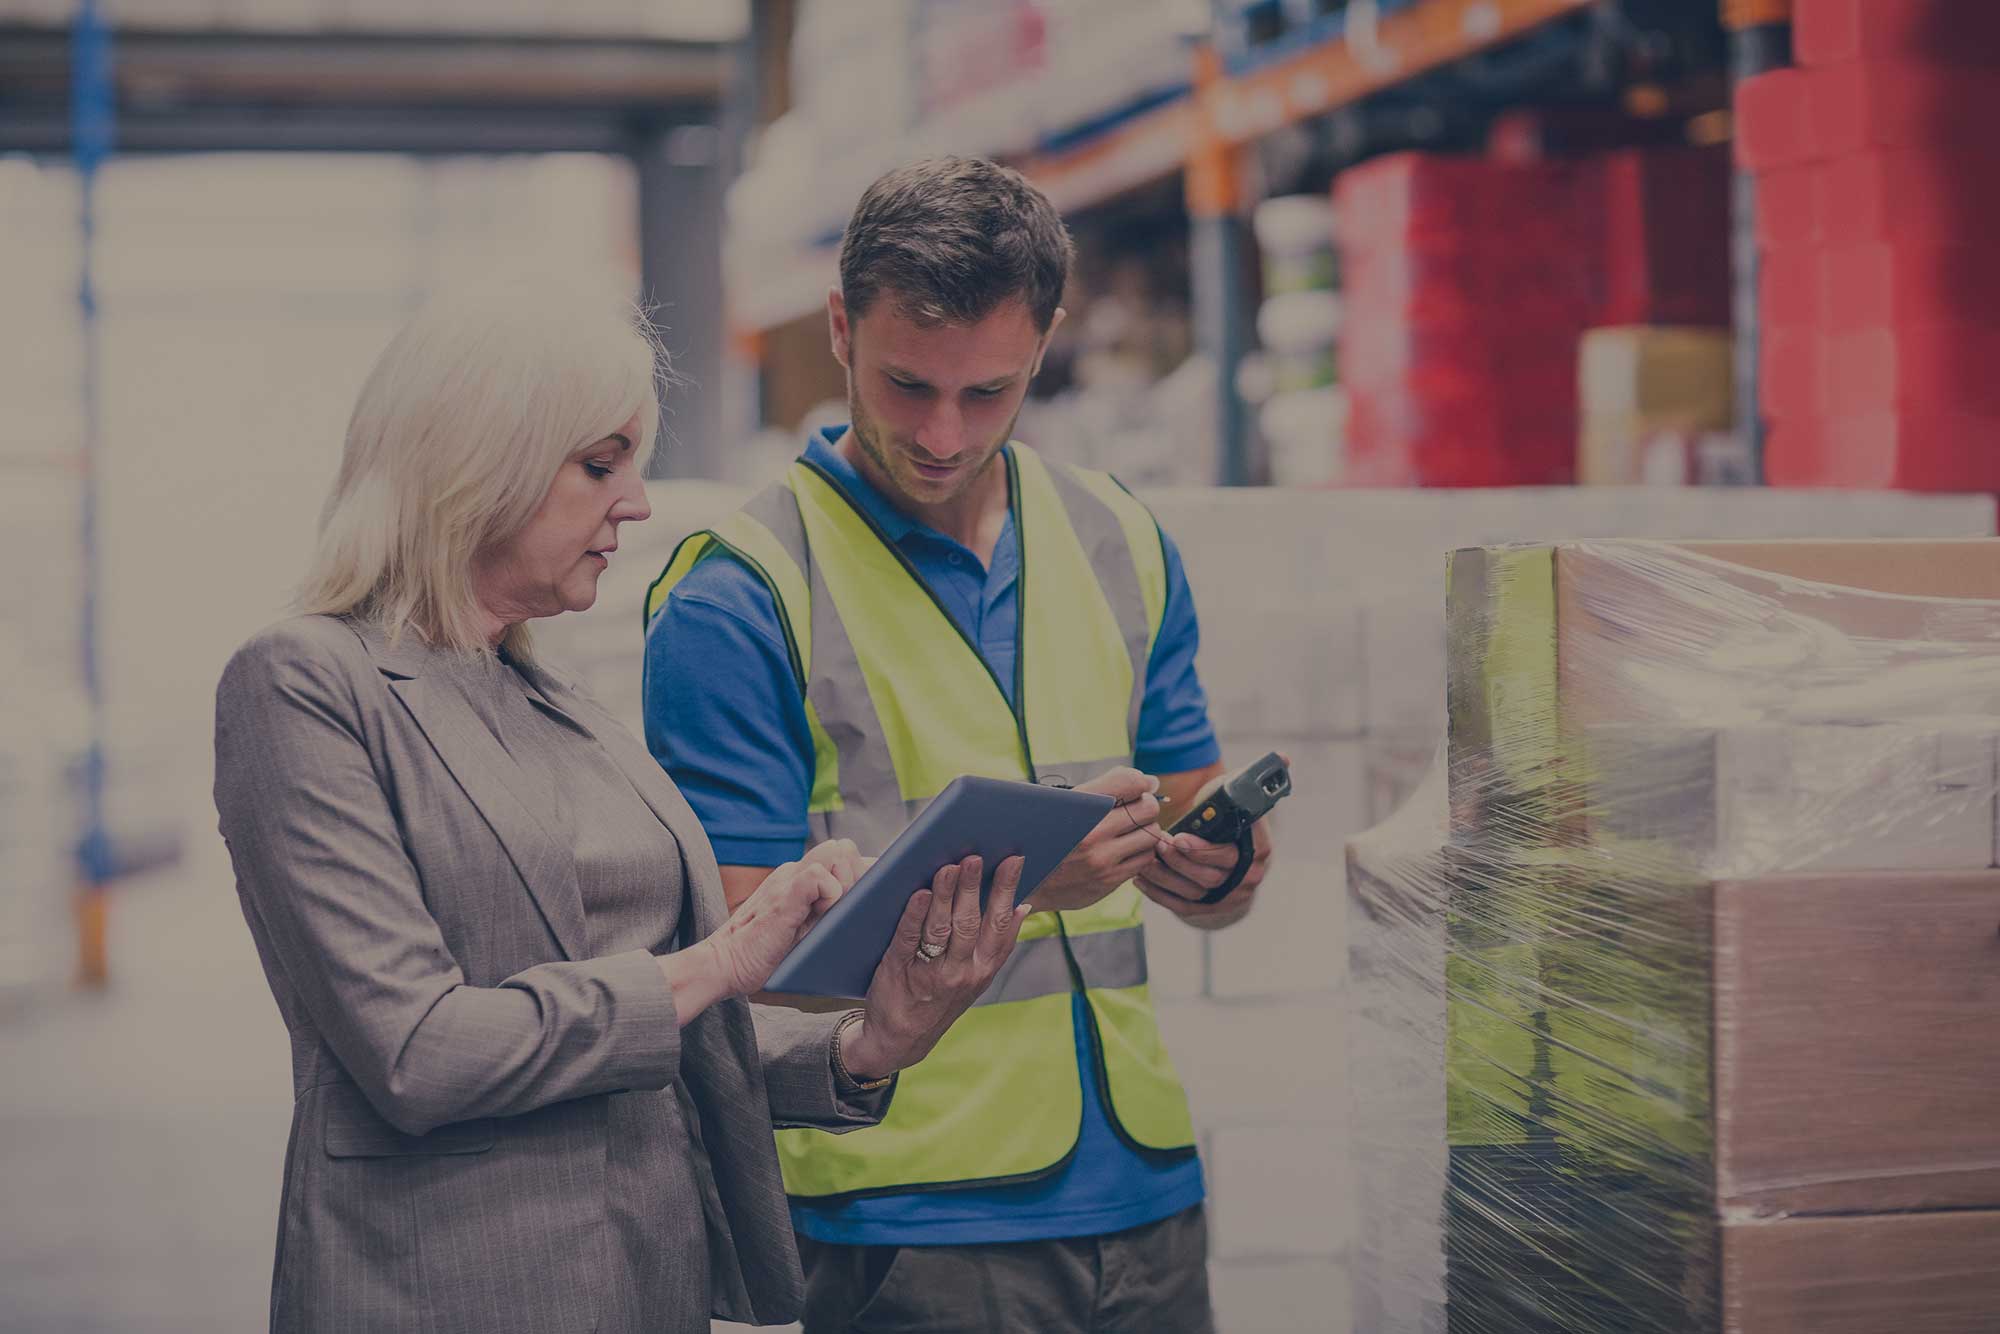 Using mobile technology in a warehouse